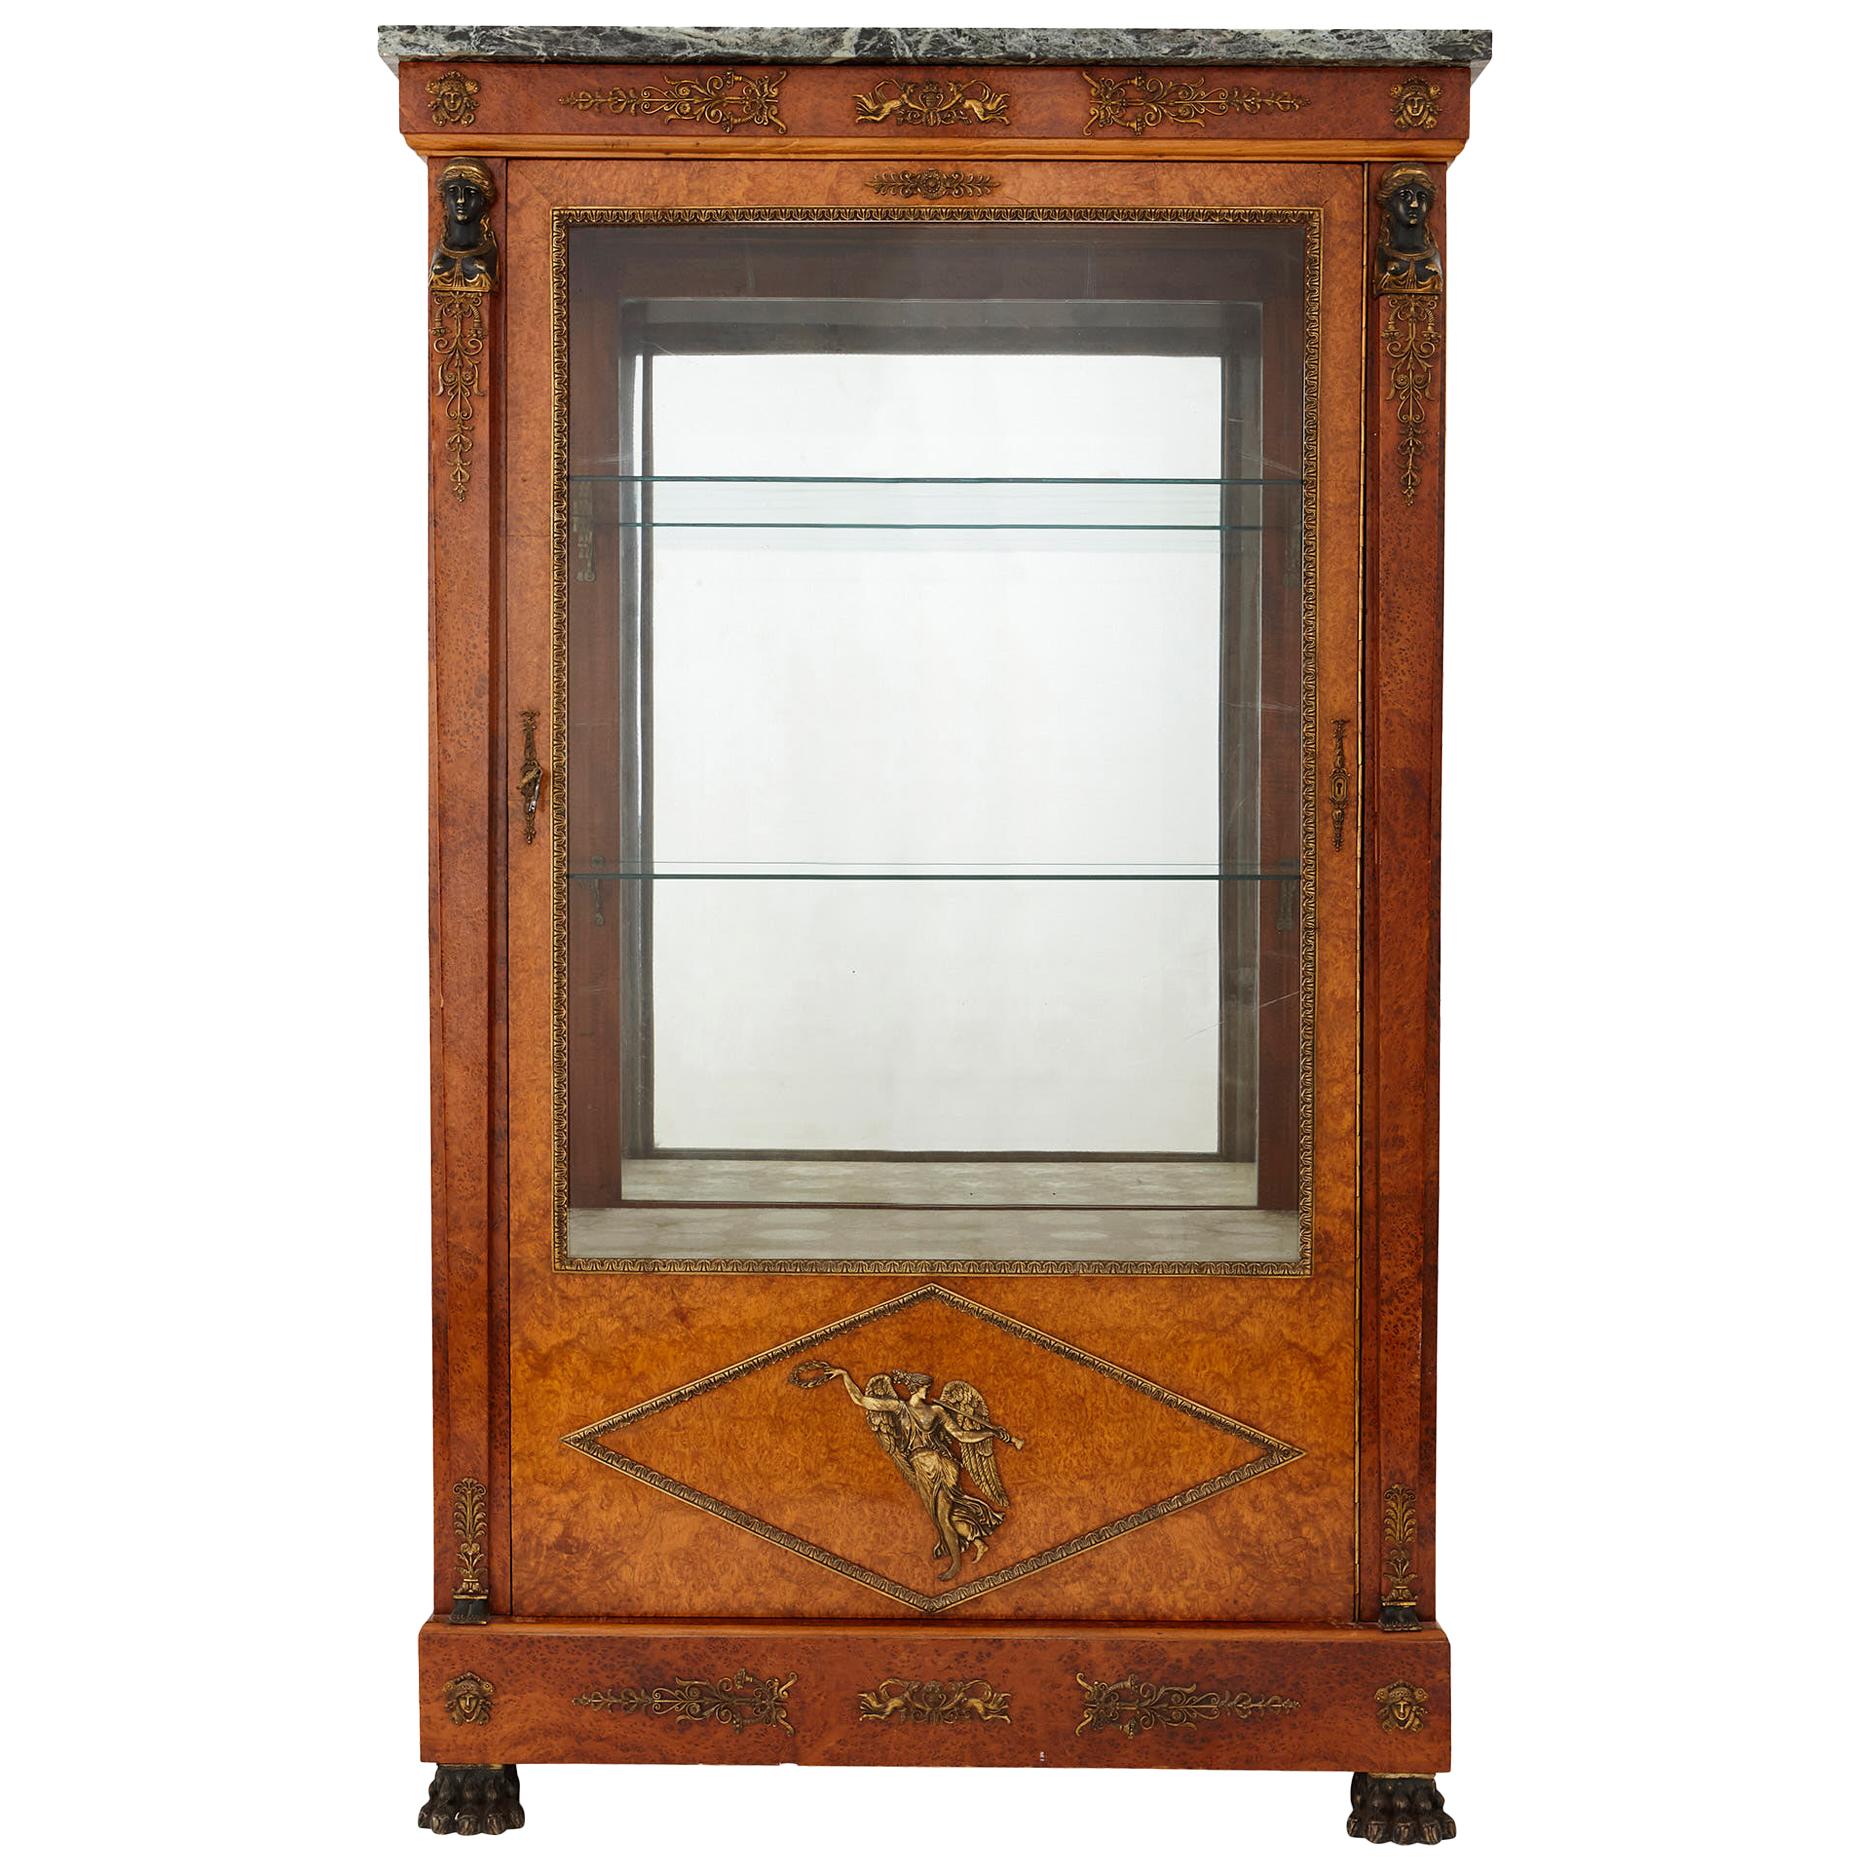 Burr-Amboyna, Marble, Gilt and Patinated Bronze Cabinet by Maison Krieger For Sale